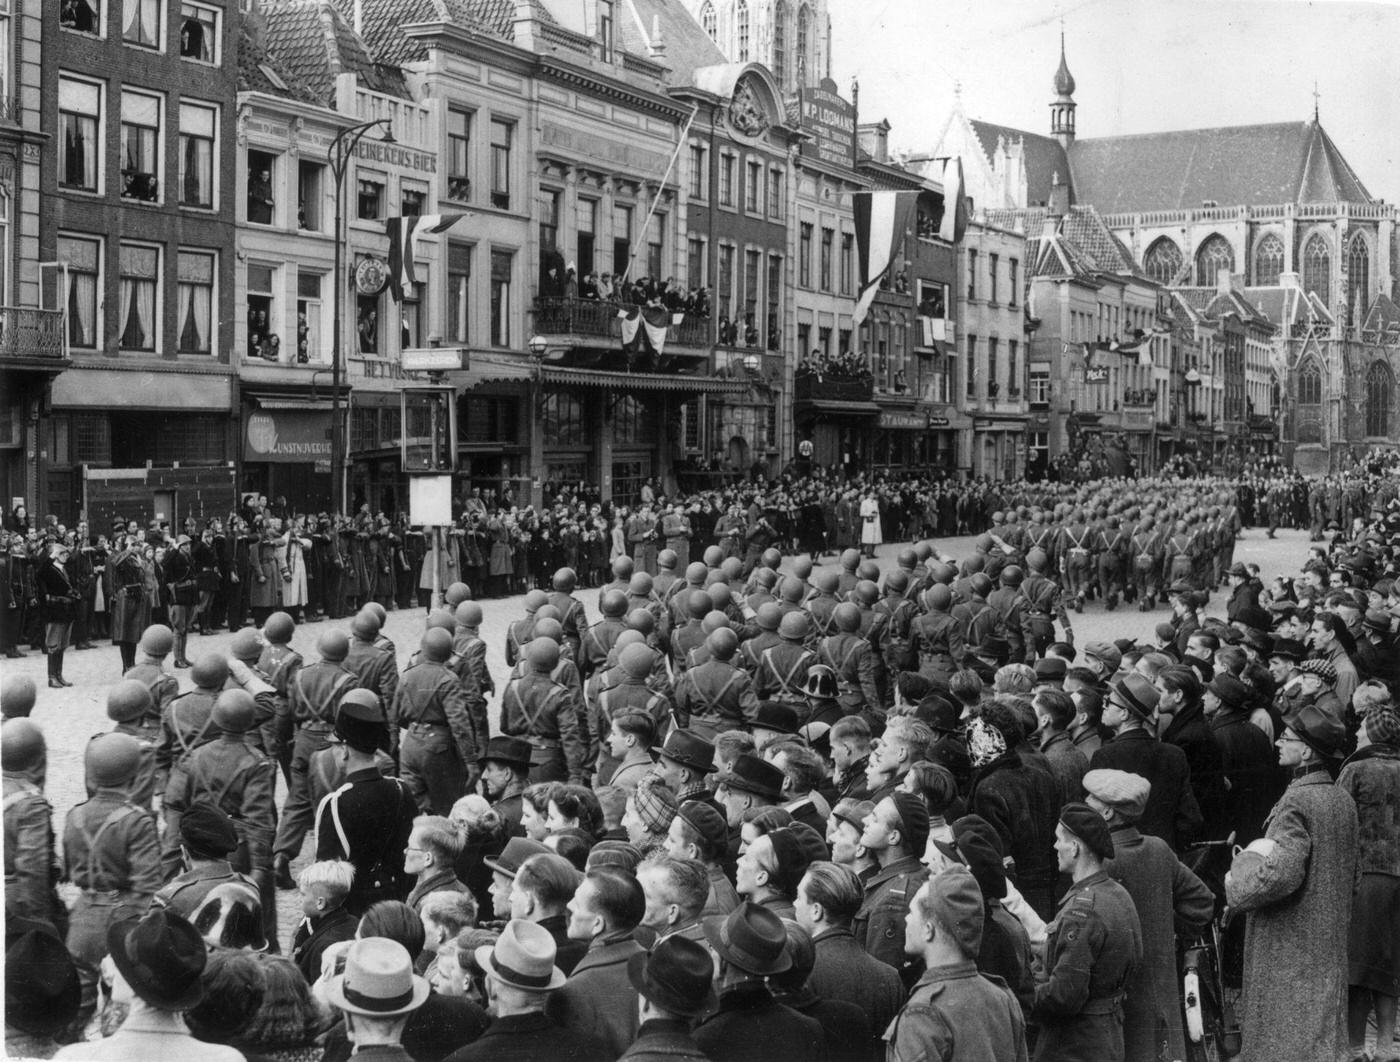 Soldiers of the 1st Polish Armoured Division form a triumphant procession through the streets of Breda in the Netherlands, after liberating the city from the Germans during World War II.